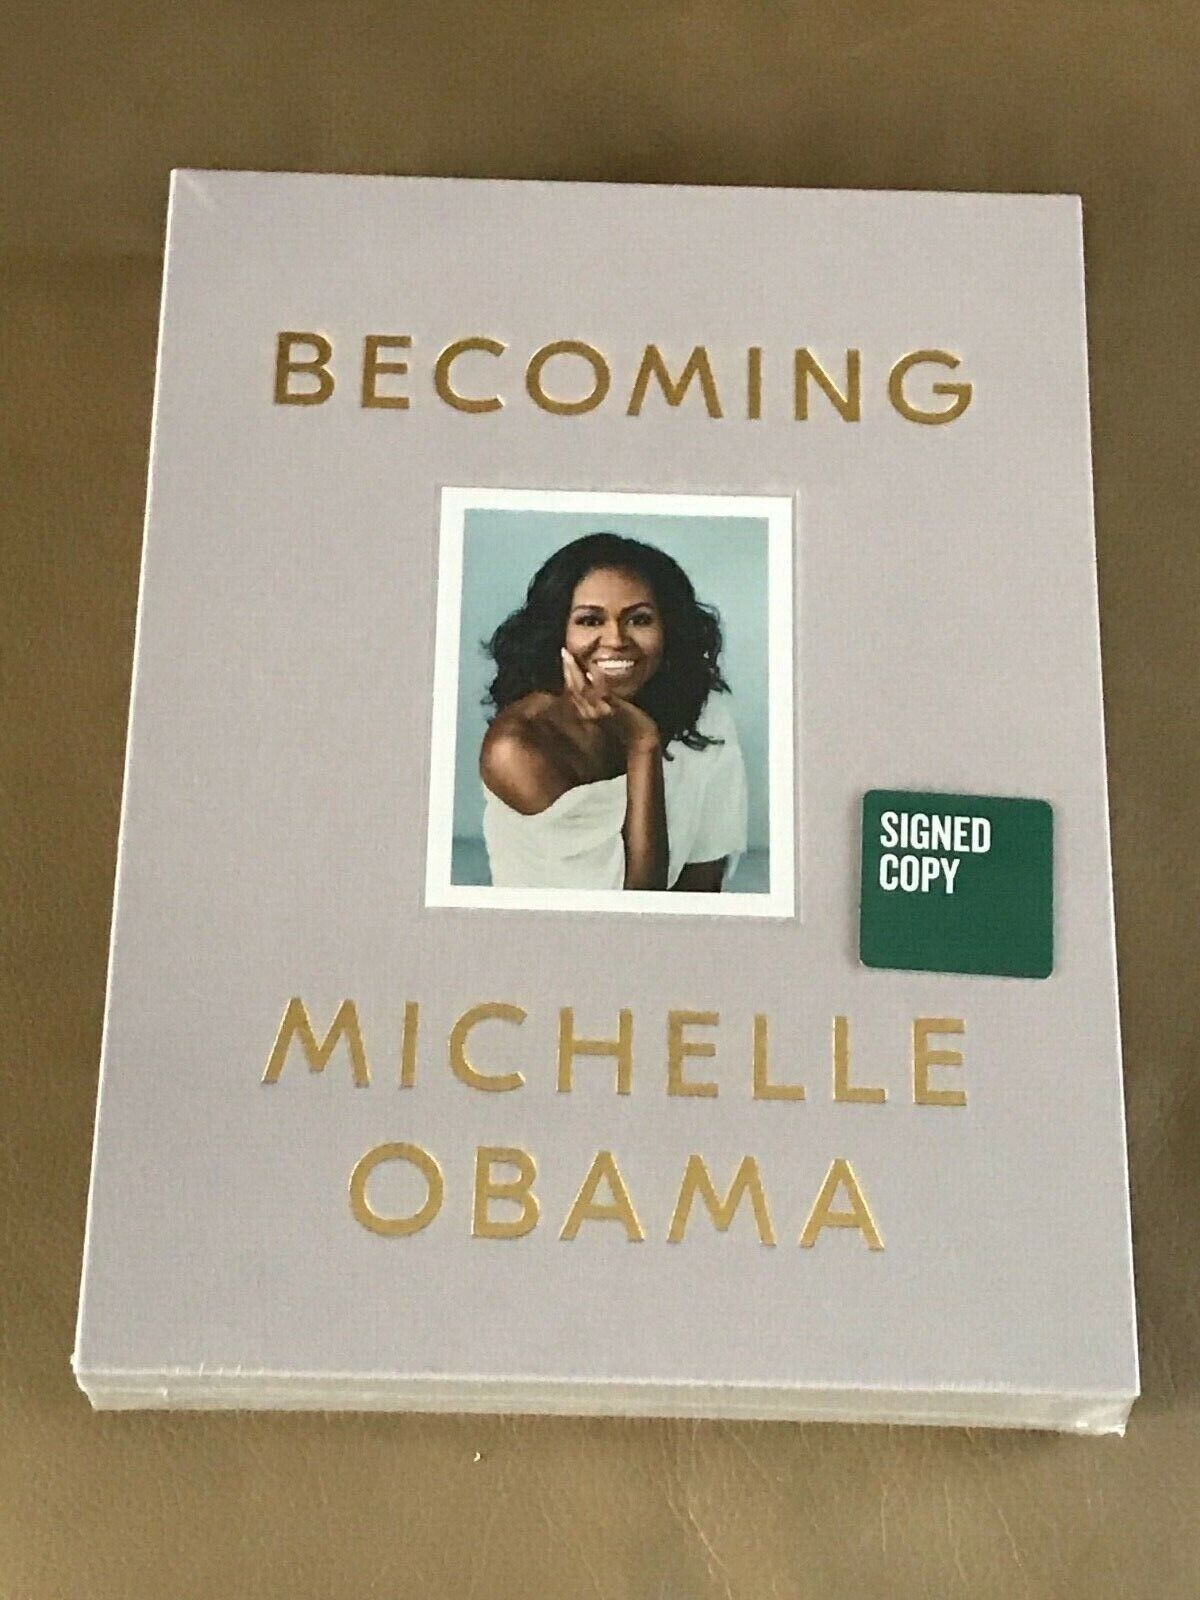 Becoming By Michelle Obama SIGNED Deluxe Boxed Edition Still In Shrink Wrap